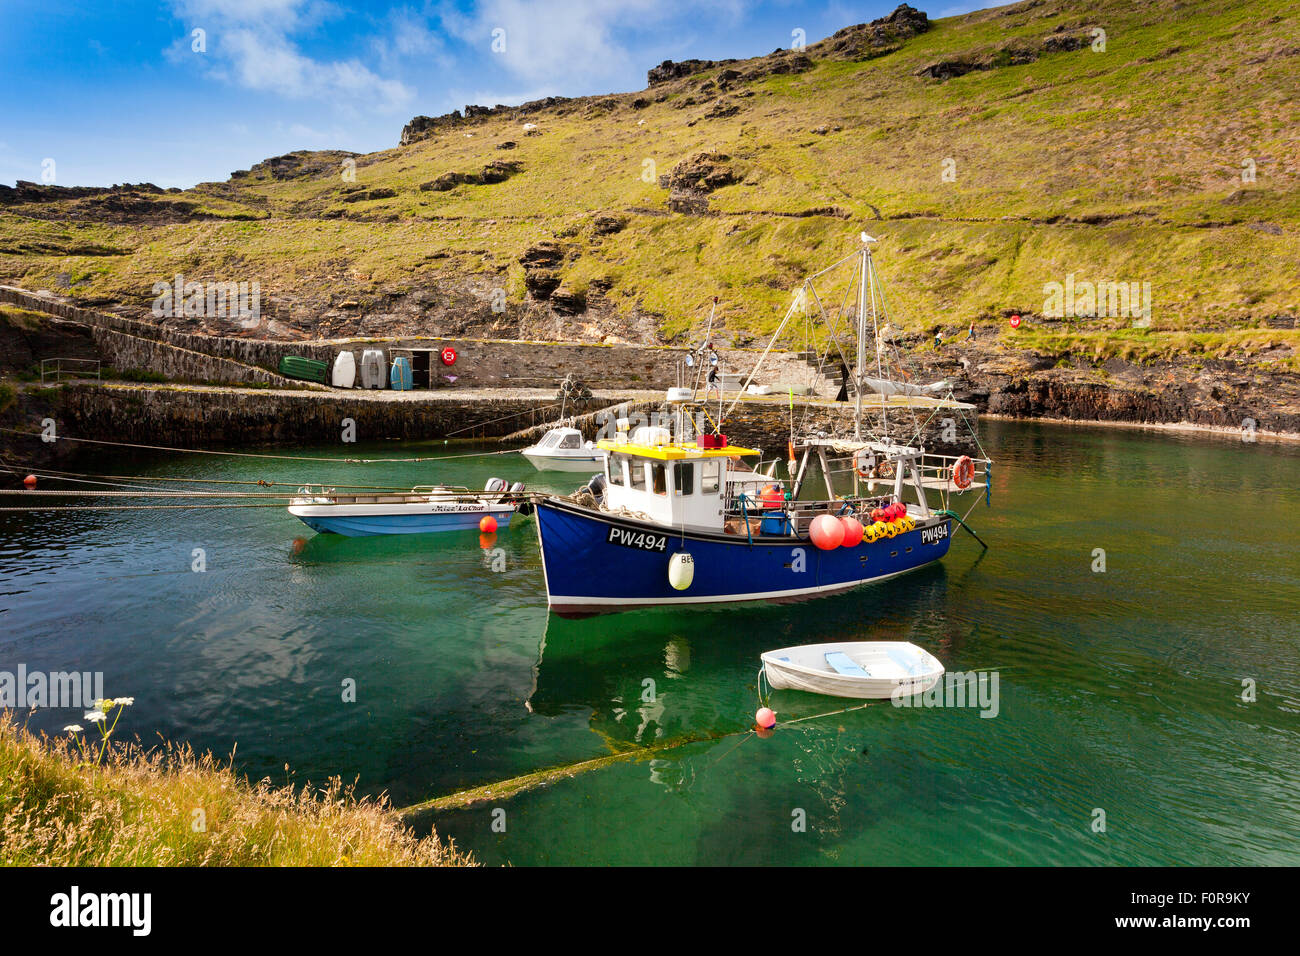 A colourful fishing boat in the harbour at Boscastle, north Cornwall, England, UK Stock Photo